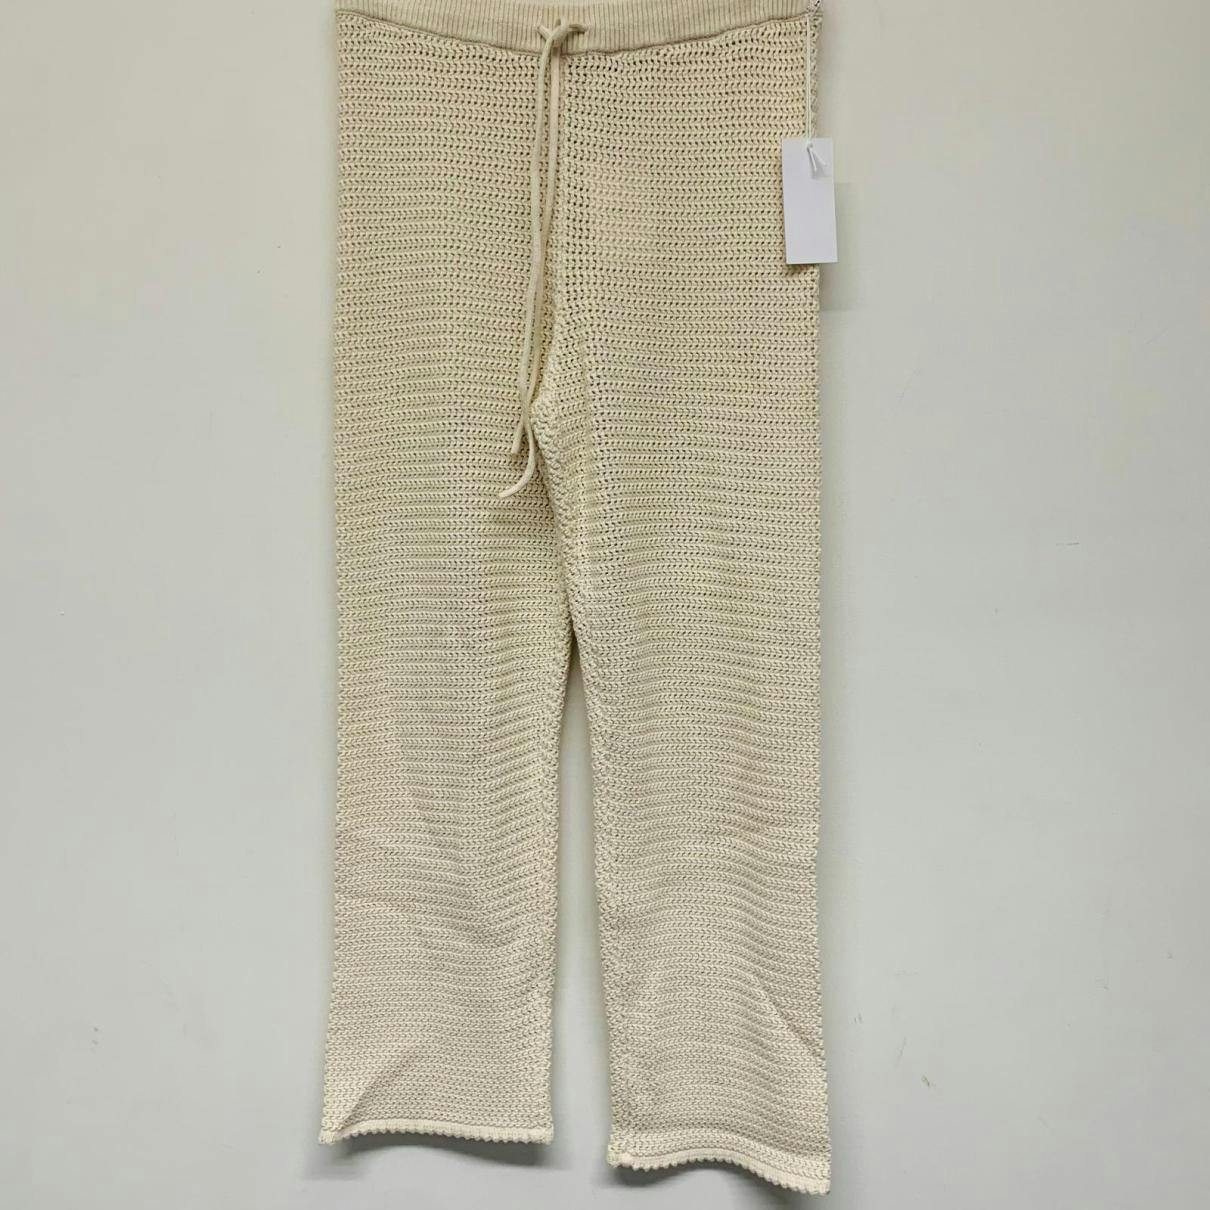 https://images.vestiairecollective.com/cdn-cgi/image/q=75,f=auto,/produit/white-synthetic-reformation-trousers-35136158-10_2.jpg?secret=VC-e9eee96a-a819-4431-ad12-d066be2626ef